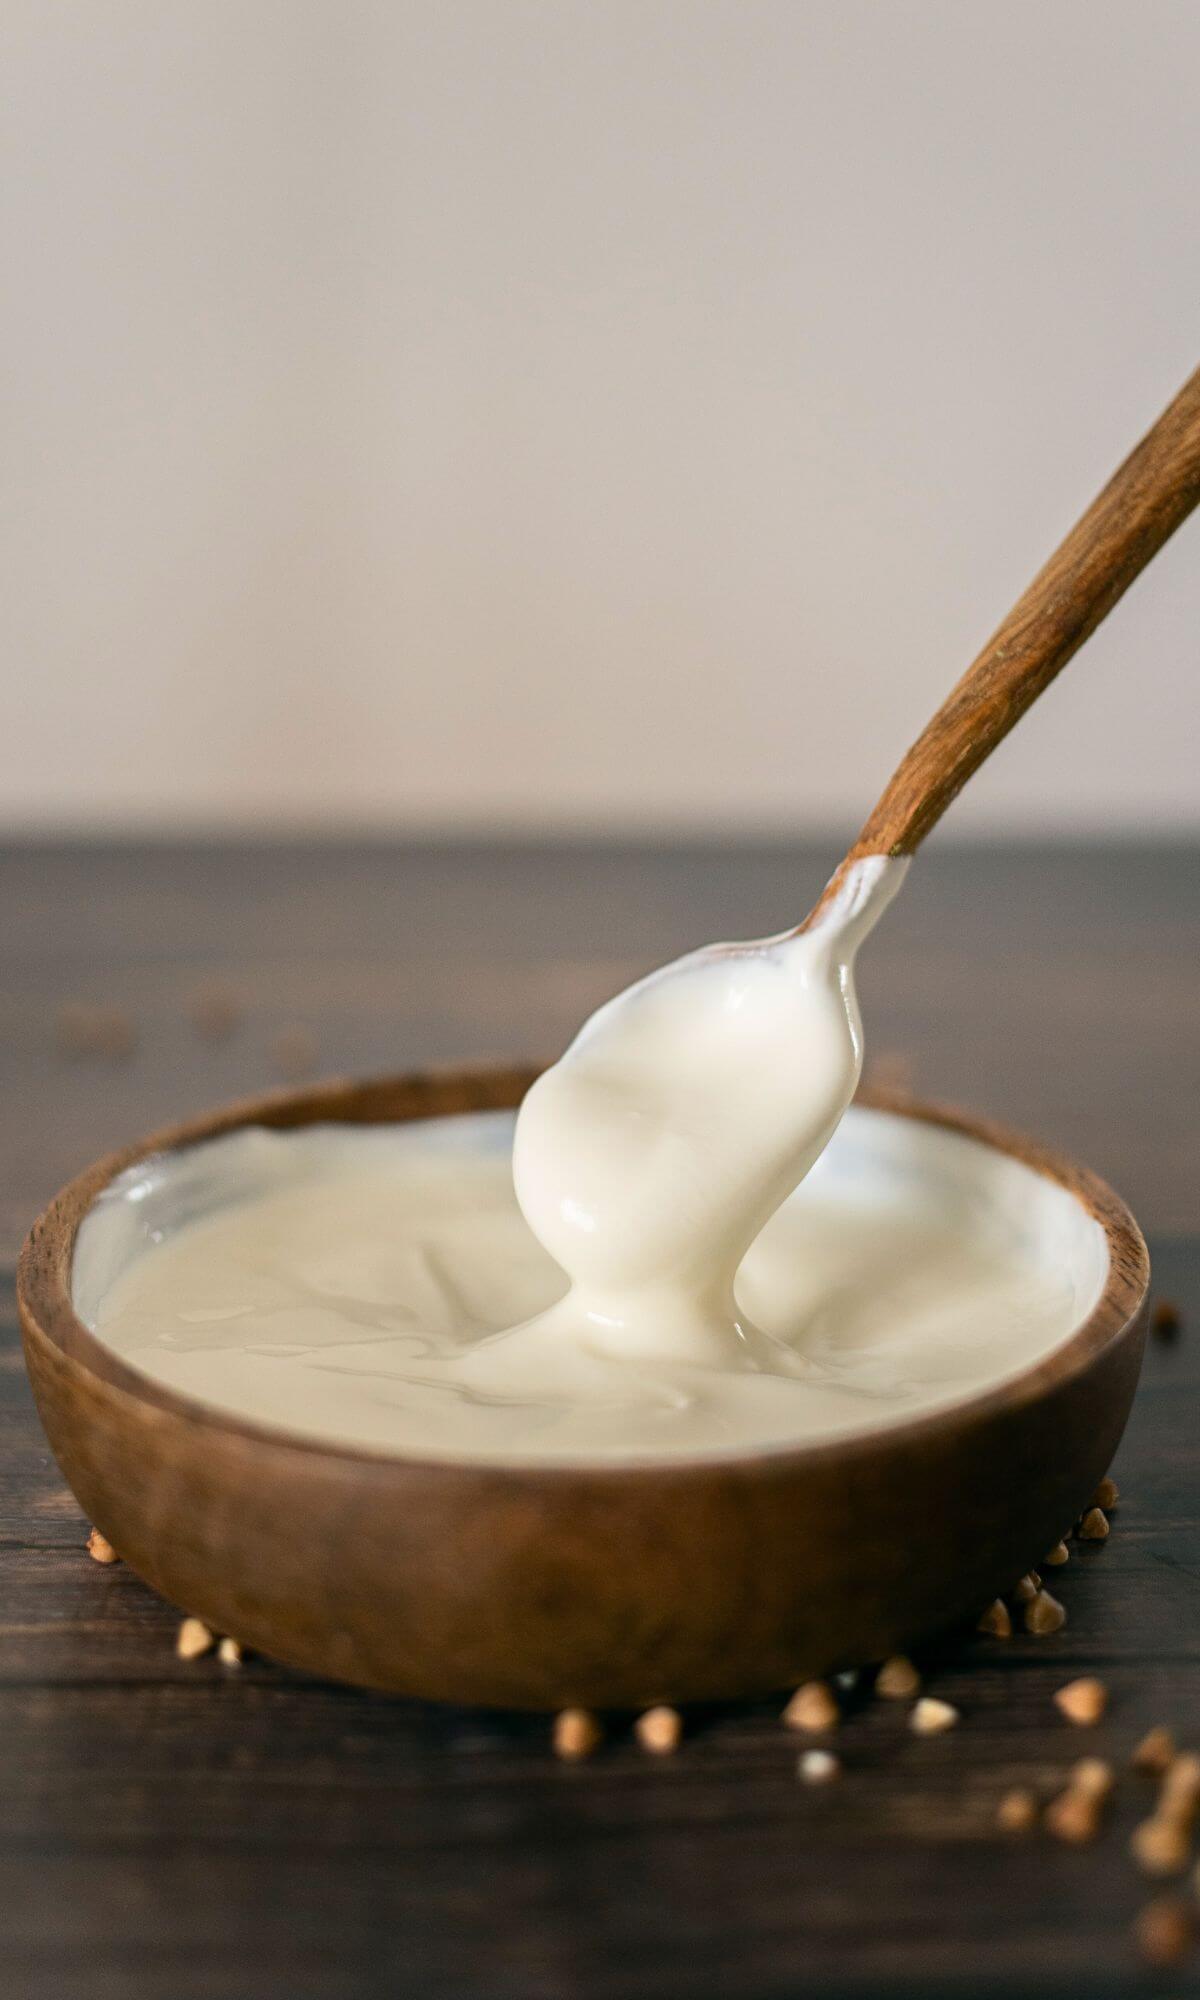 A wooden spoon dipping into a wooden bowl filled with sour cream.